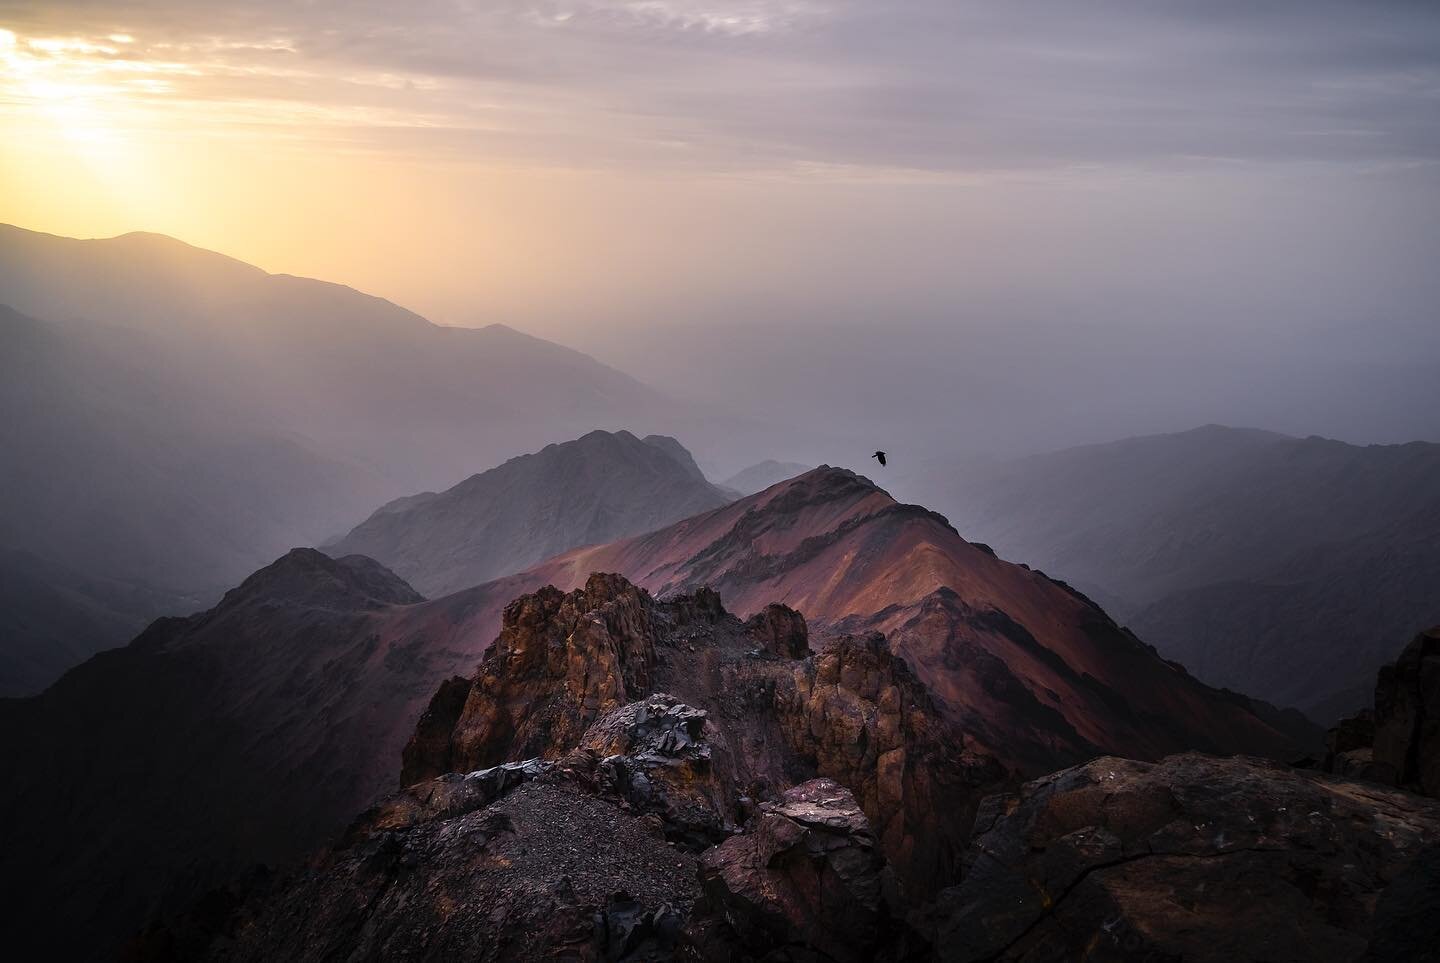 &ldquo;Rugged Atlas&rdquo; 

A feeling relief, gratitude and accomplishment washed over me as I reached the Precipice of Mt Toubkal (4167m), the rugged beauty and Grandeur would have taken my breath away but the altitude seemed to have taken care of 